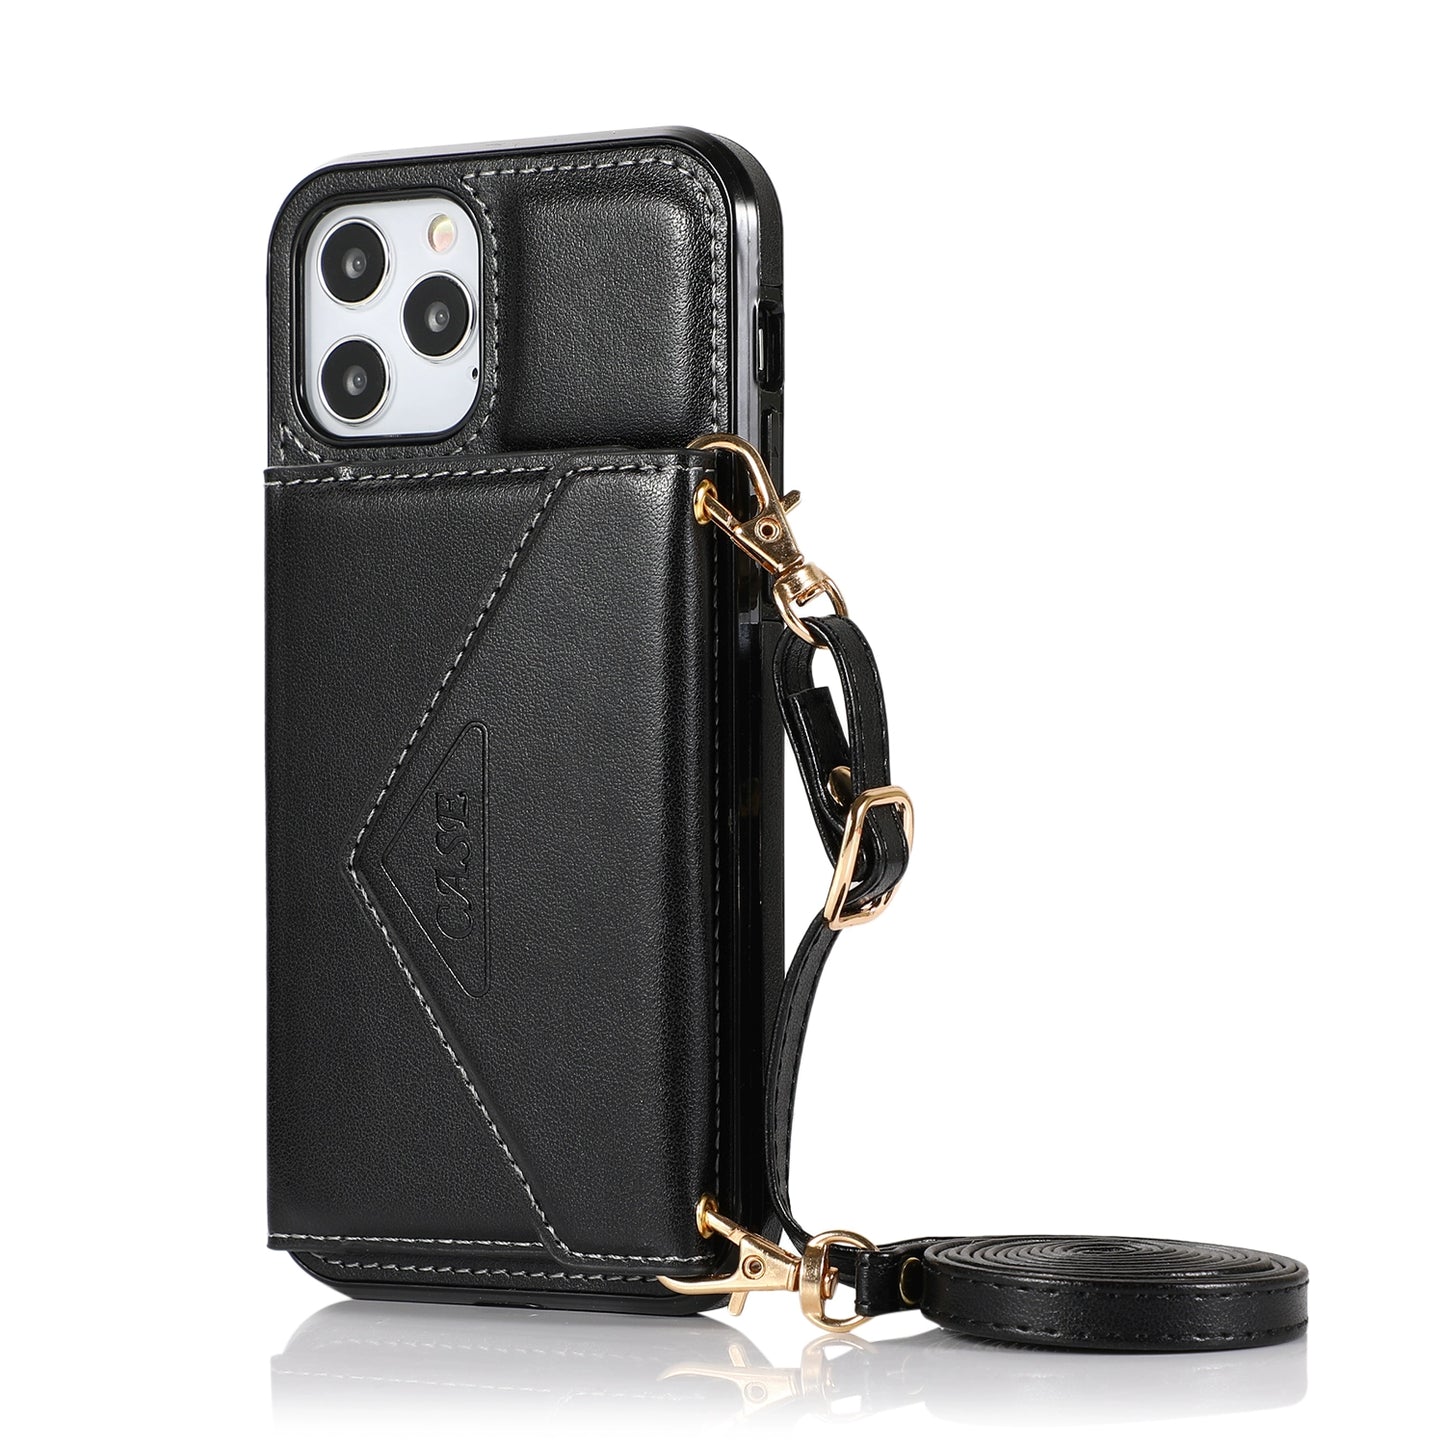 Personalized Leather iPhone Case Wallet for iPhone 13/ iPhone 12/ iPhone 11/ iPhone 7/ iPhone 8/ iPhone X, Trifold Stand Wallet with Crossbody Strap